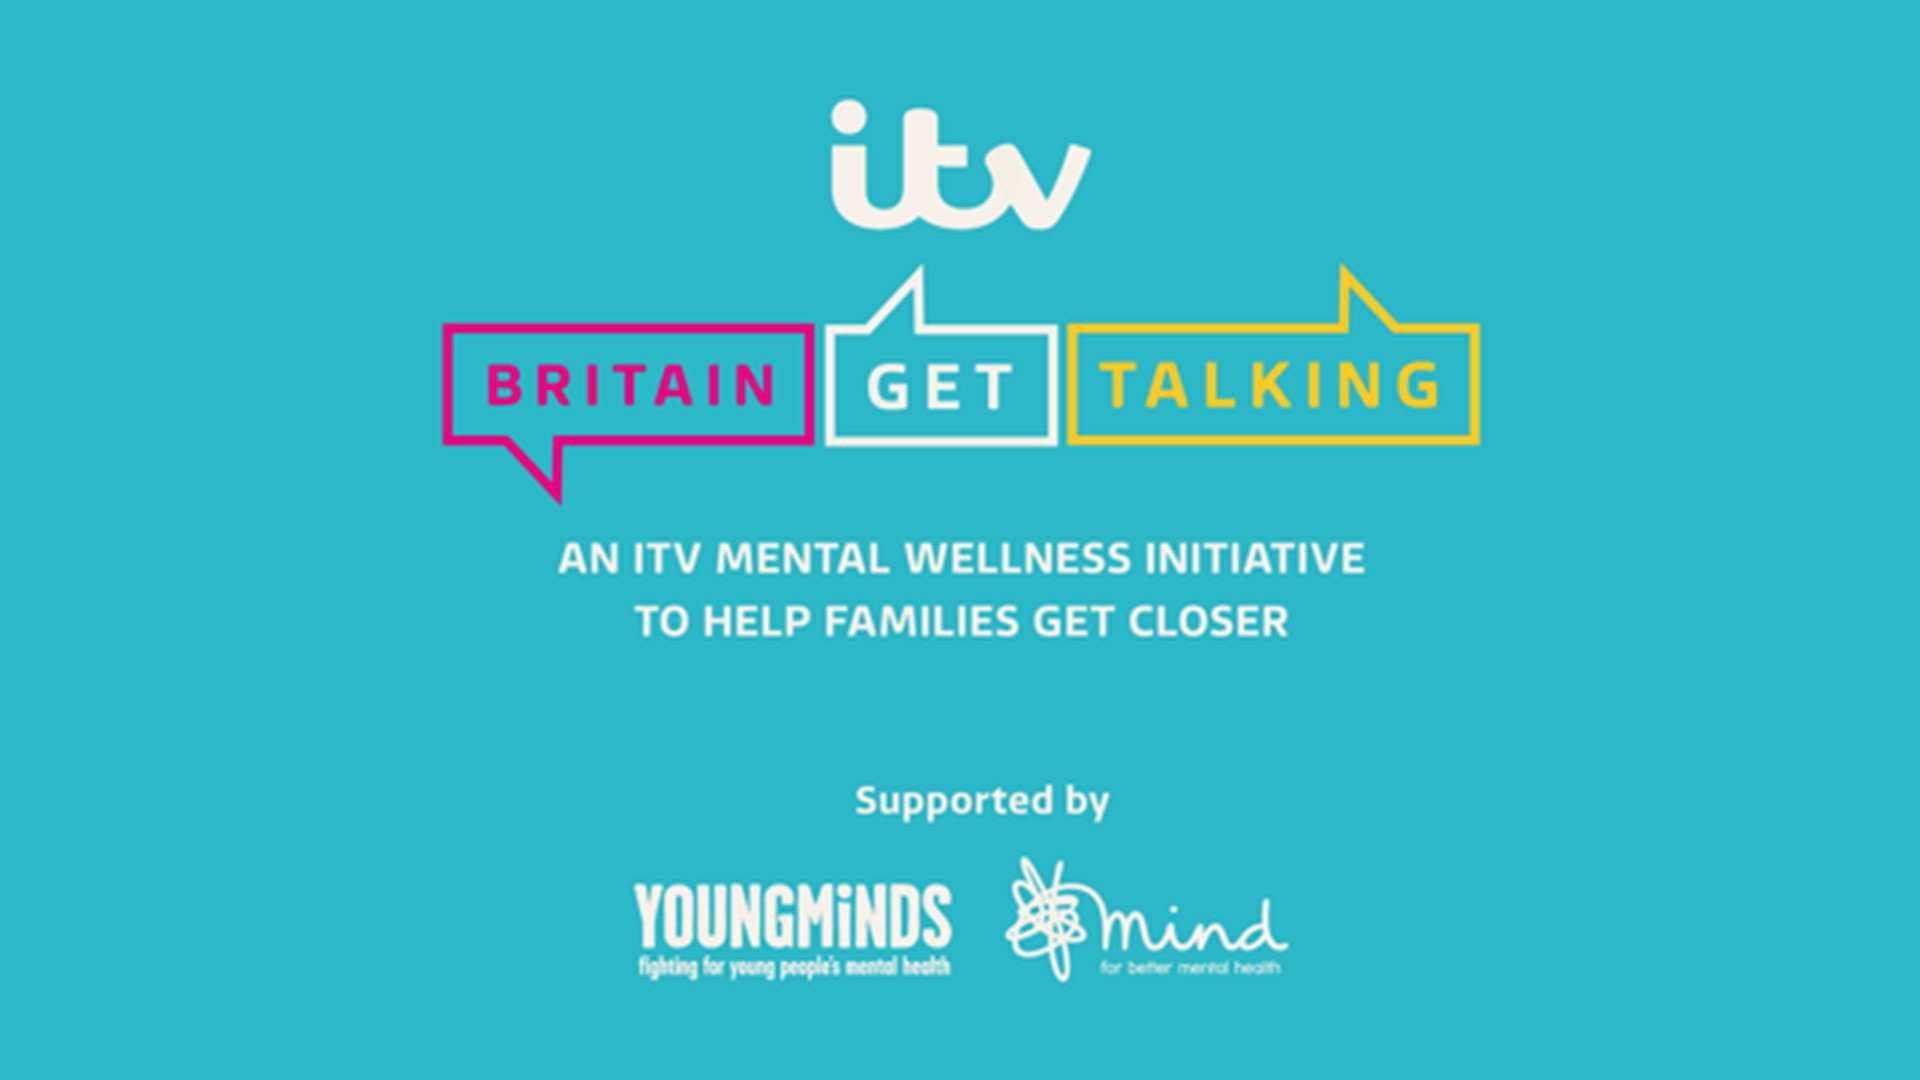 ITV Britain get talking logo. Underneath the logo it says 'an ITV mental wellness initiative to help families get closer'. Supported by YoungMinds and Mind.